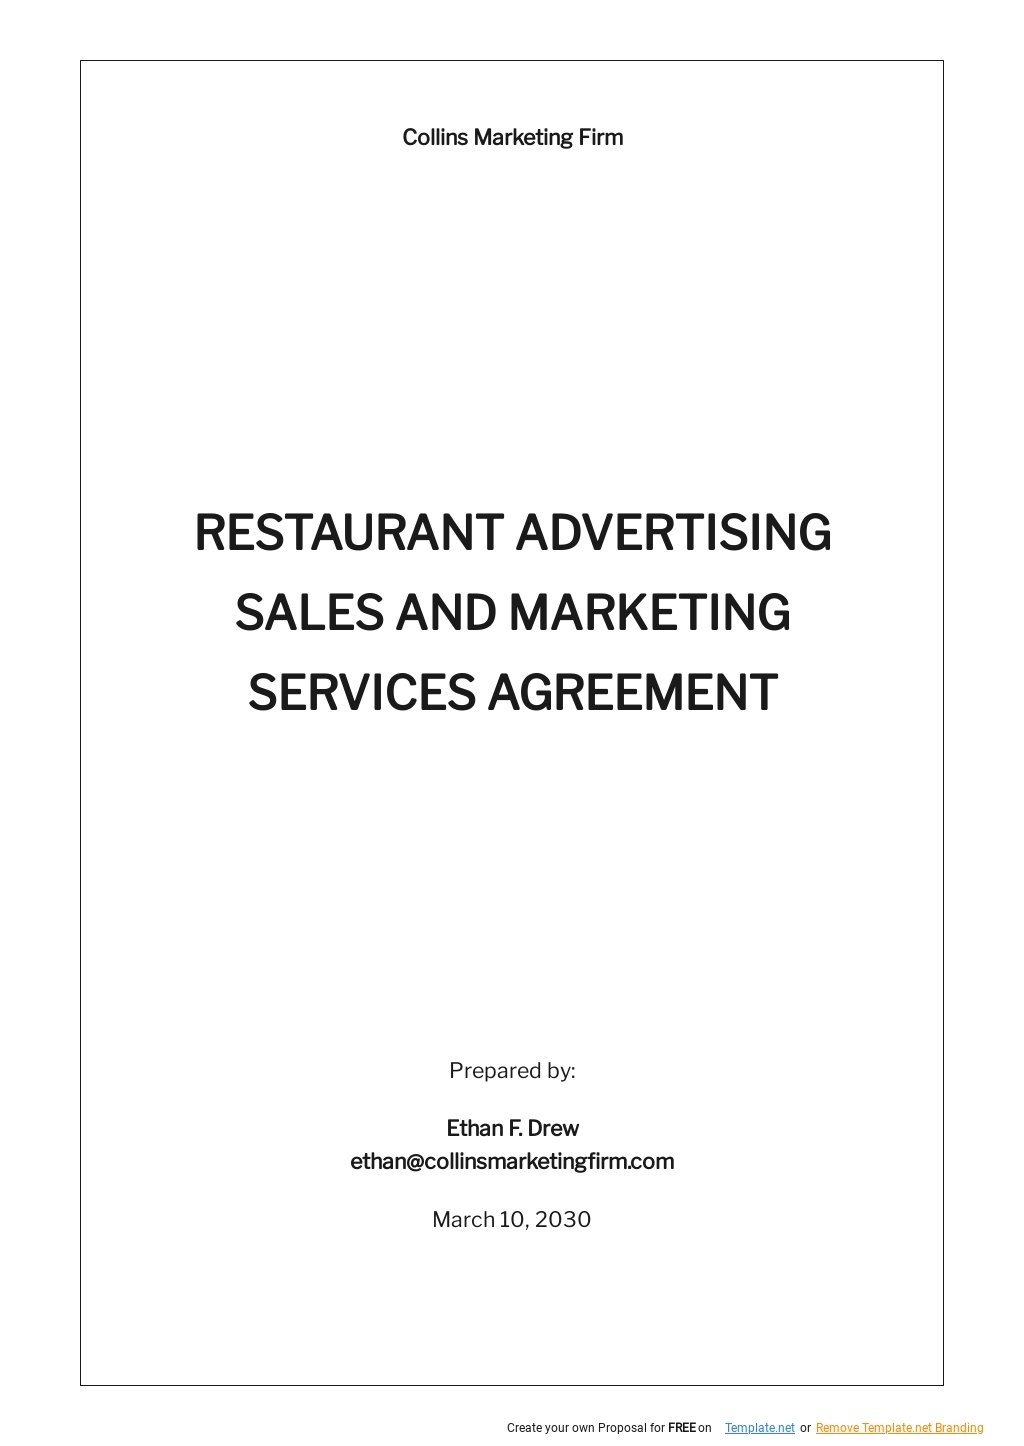 Restaurant Advertising Sales and Marketing Services Agreement Template.jpe